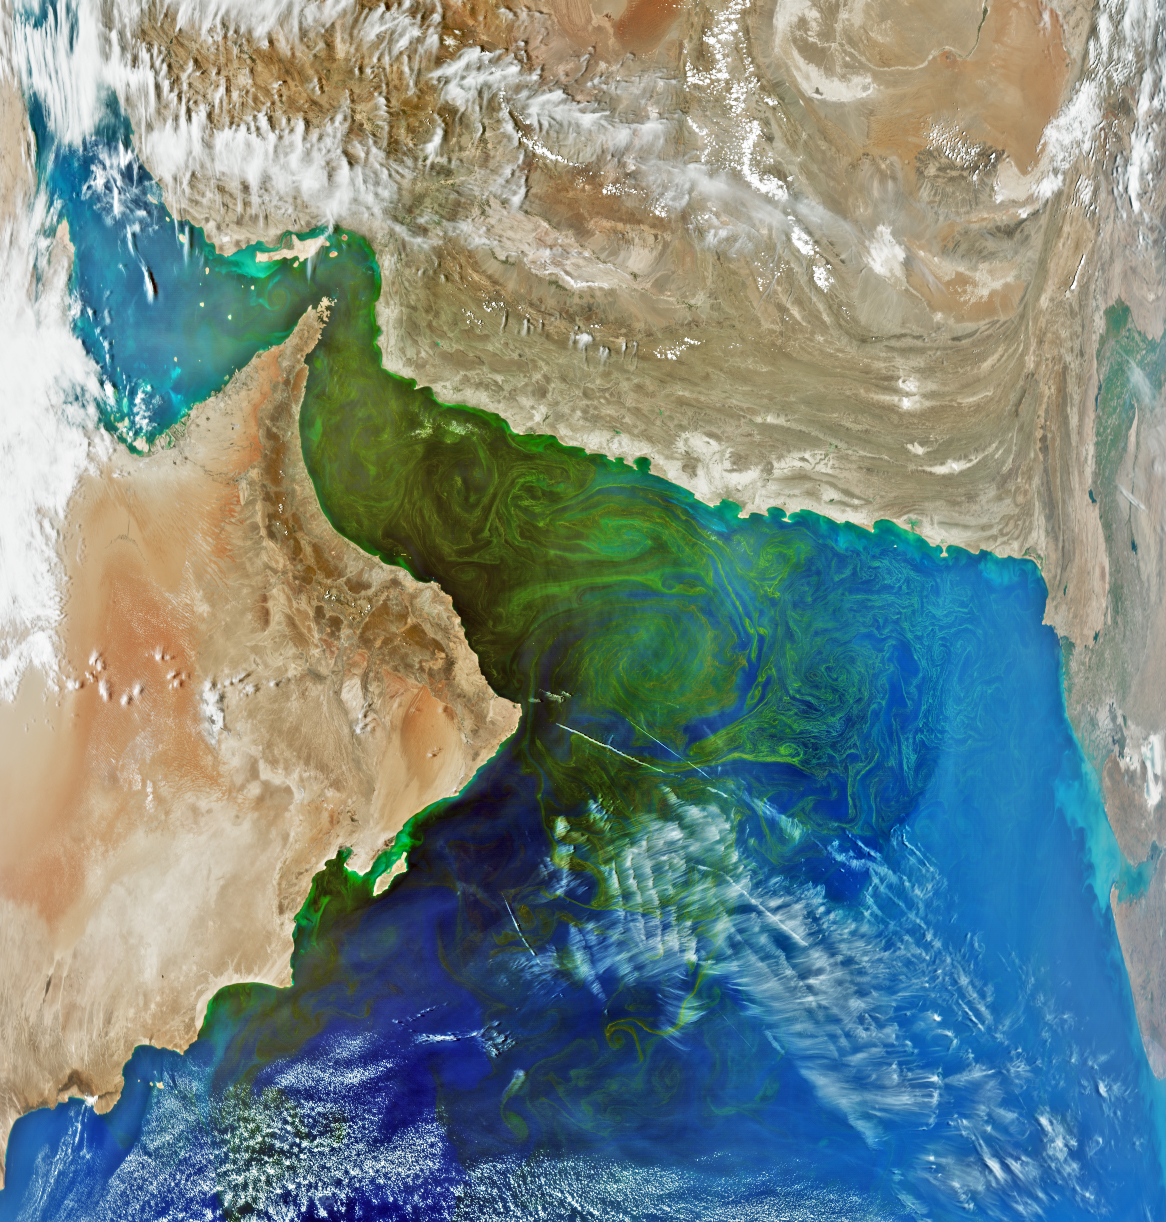 Satellite view of the Gulf of Oman and surrounding land. The land is all a shade of brown, ranging from reddish, to khaki to a non-descript light brown. The water of the gulf of oman is completely green in this image, at it's most dense it is a forest green color. To the northwest the Persian Gulf waters that feed the Gulf of Oman start to show a light shade of greening near the Strait of Hormuz. As the Gulf of Oman opens up into the Indian Ocean the shade of green lightens and disperses into vibrant blue waters in a series of eddies. Greening can also be seen along much of the included coastline away from the gulf as well. Some light cirrus clouds can be seen with the densest surrounding the Persian Gulf in the top left corner.